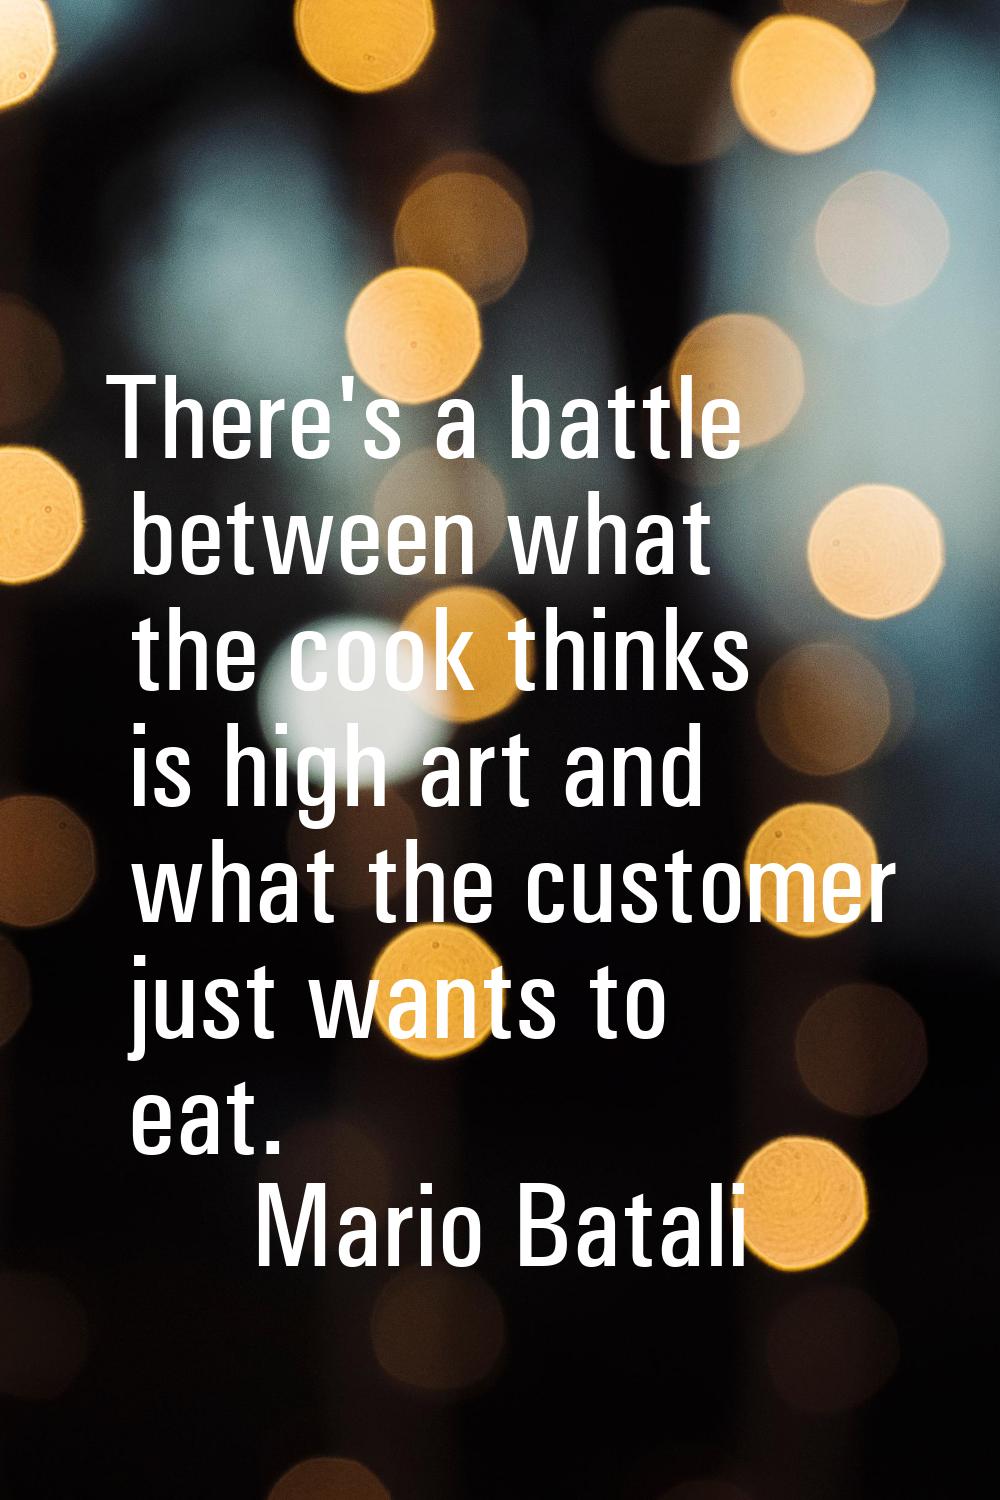 There's a battle between what the cook thinks is high art and what the customer just wants to eat.